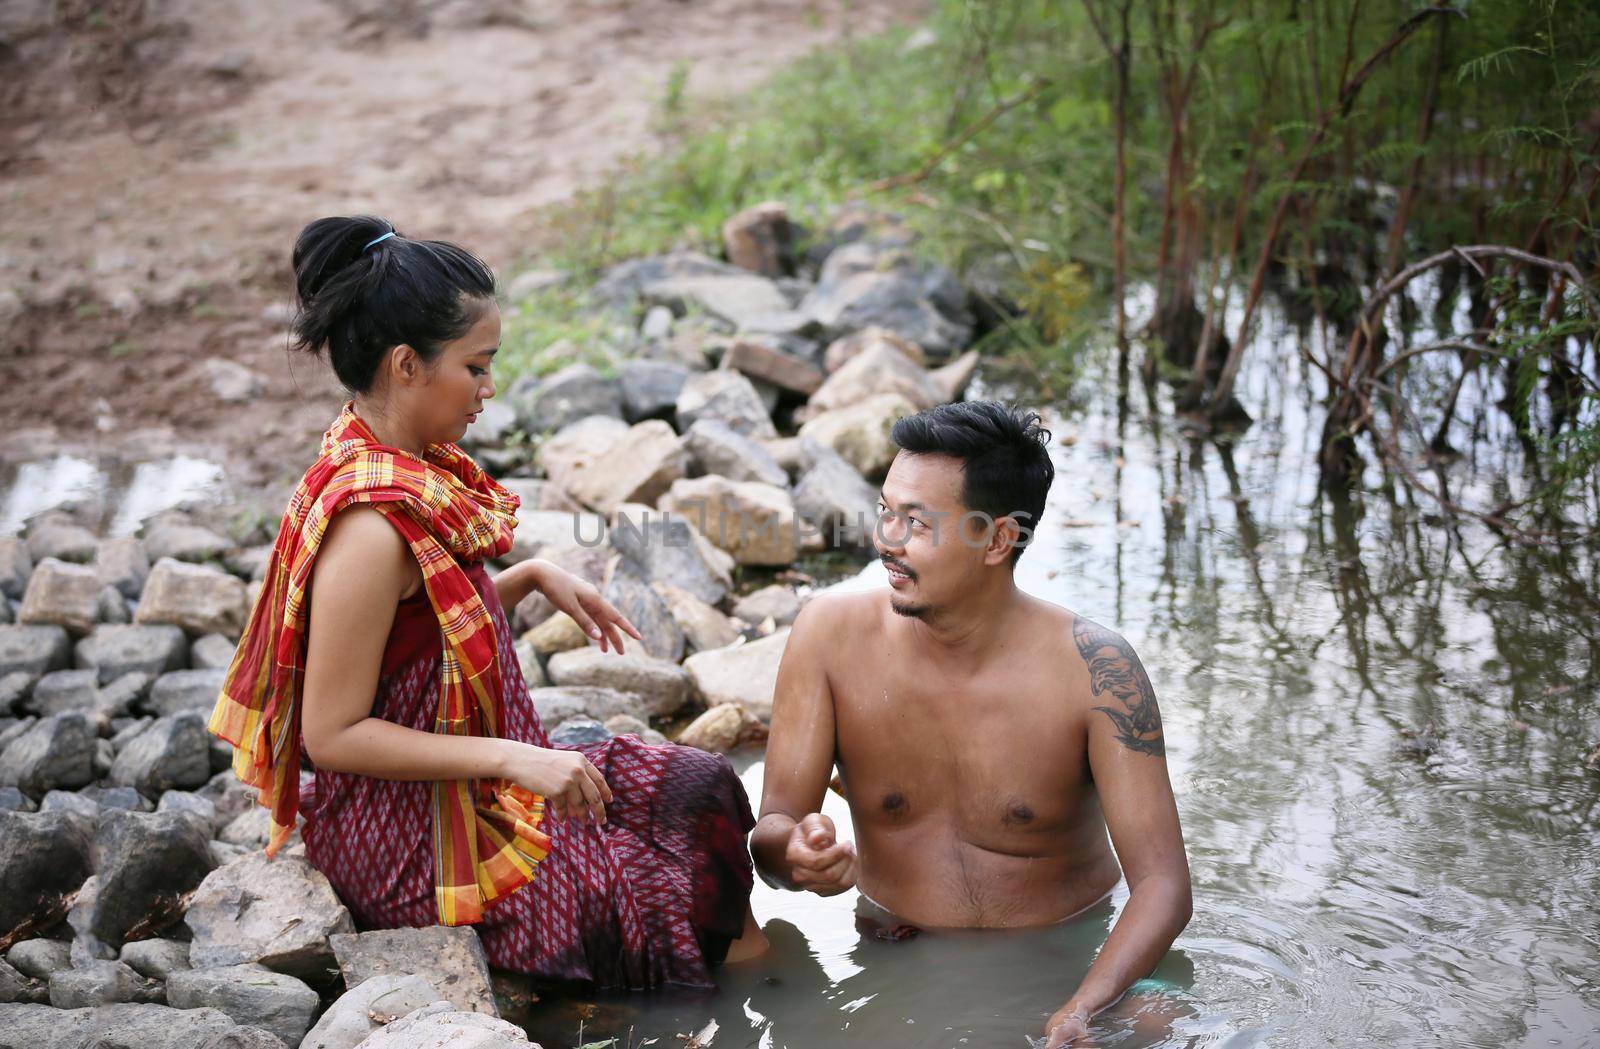 Thailand Couple love enjoy in bathing together in the river against rural background. this is life of young man and young girl couple in Countryside Thai South East Asia.